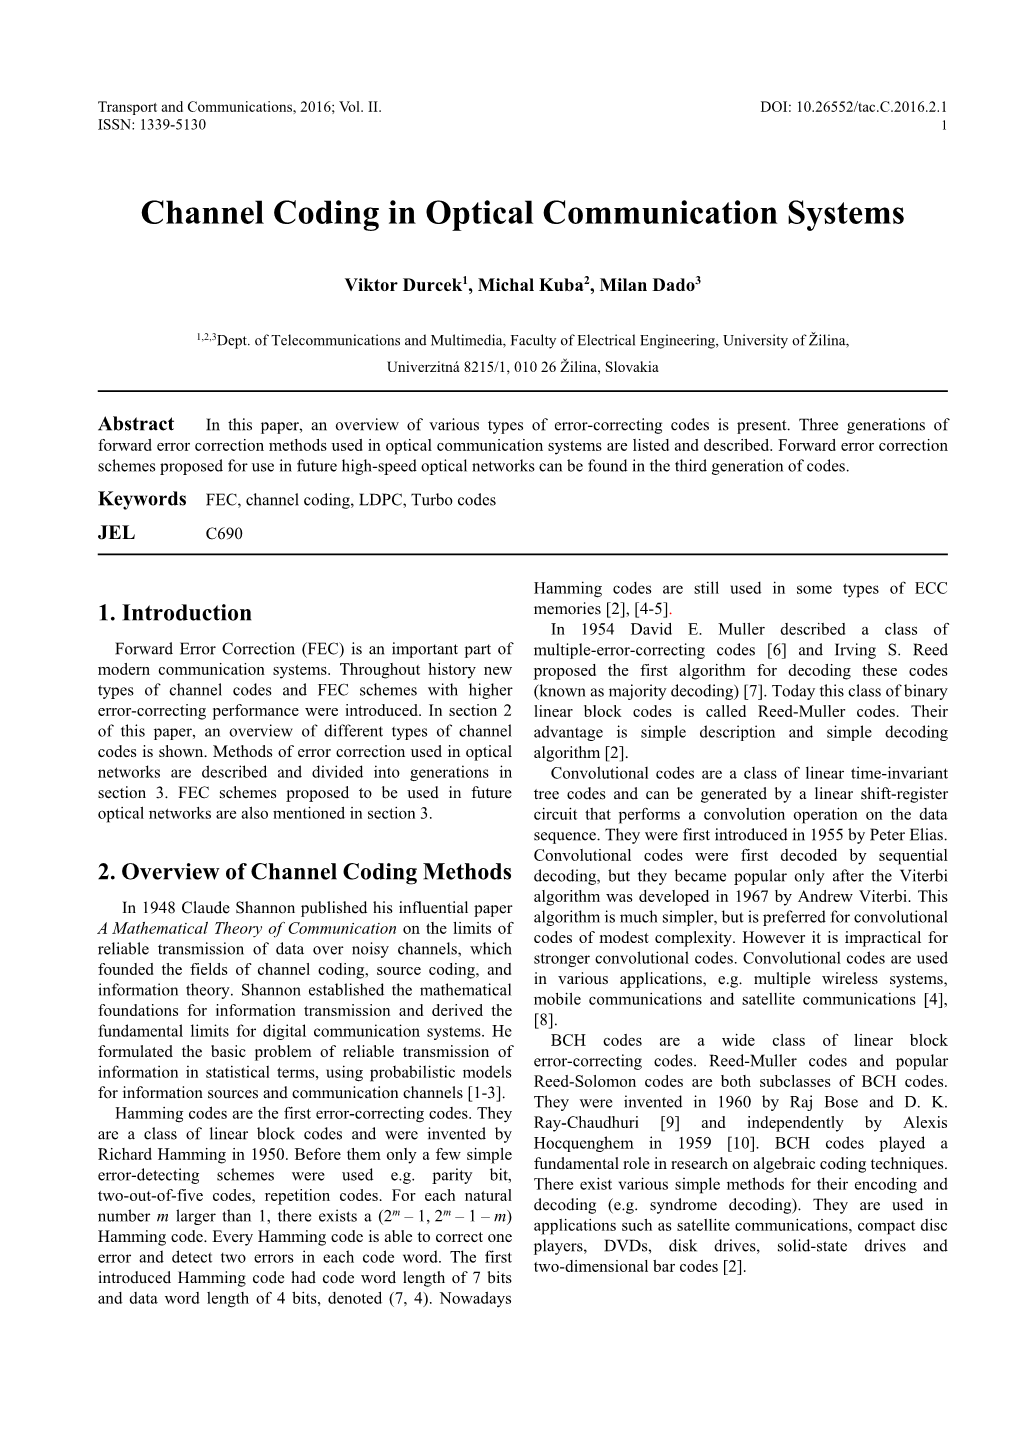 Channel Coding in Optical Communication Systems